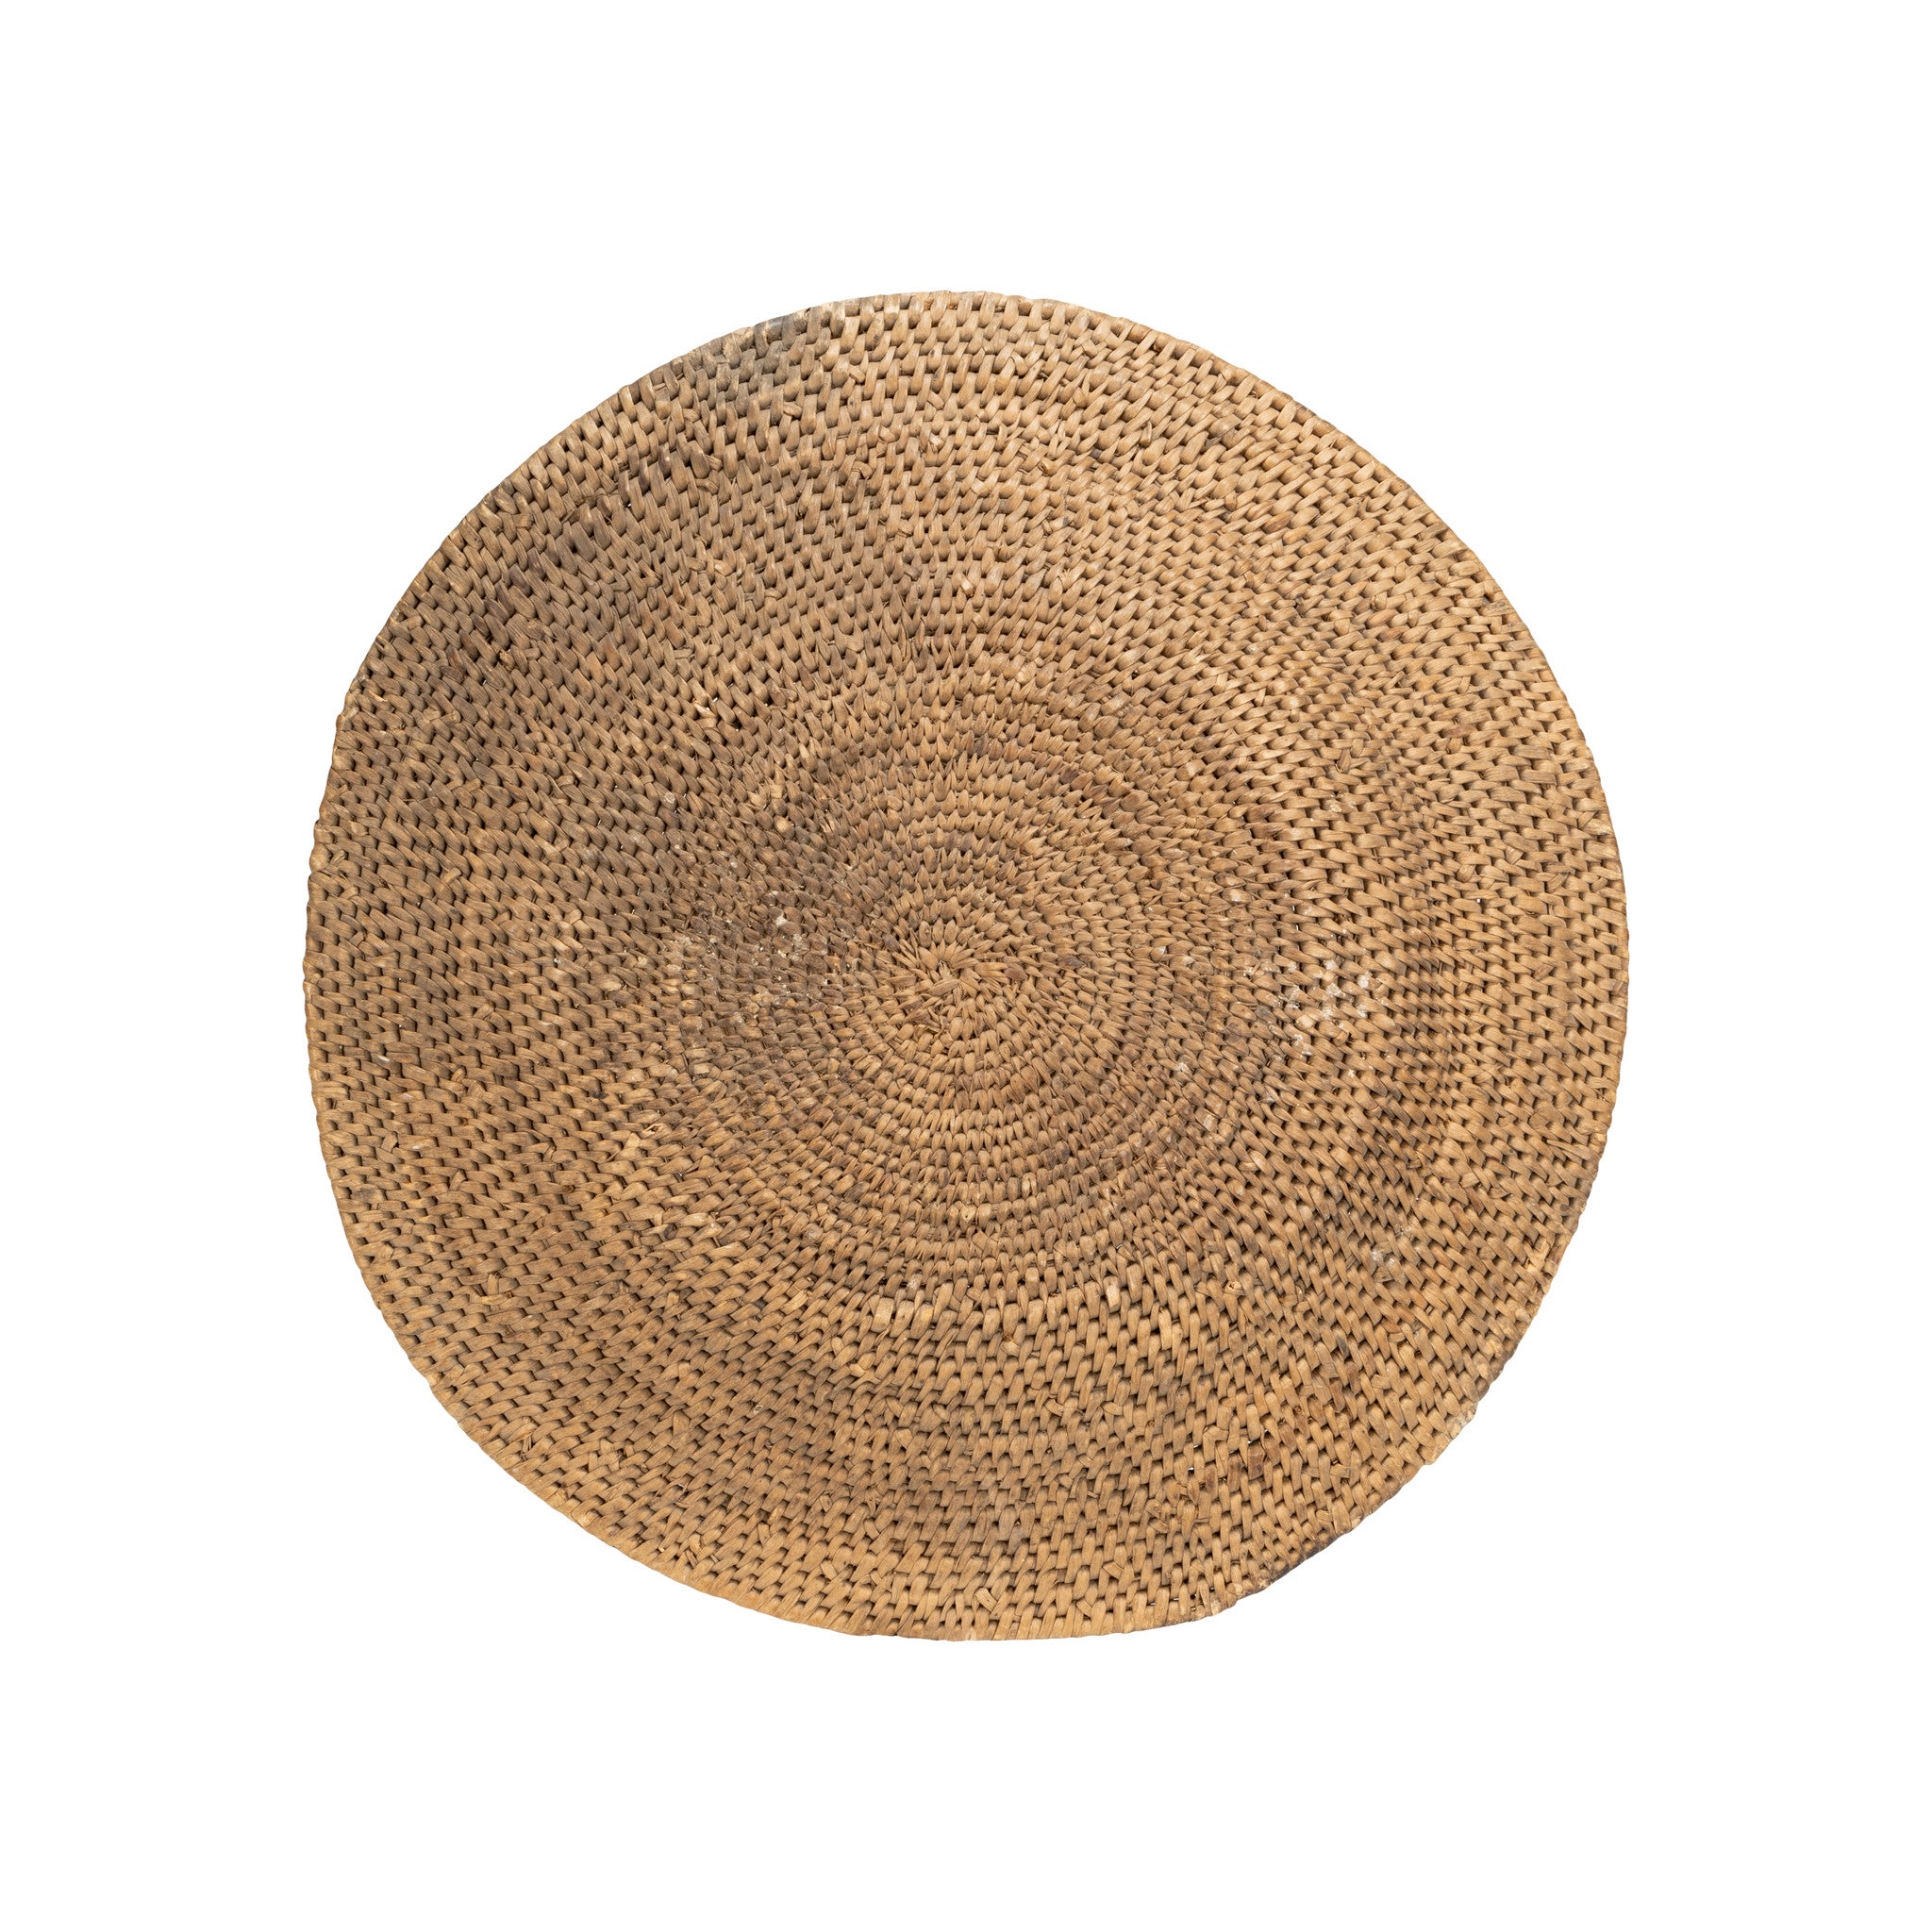 Ute Basketry Tray